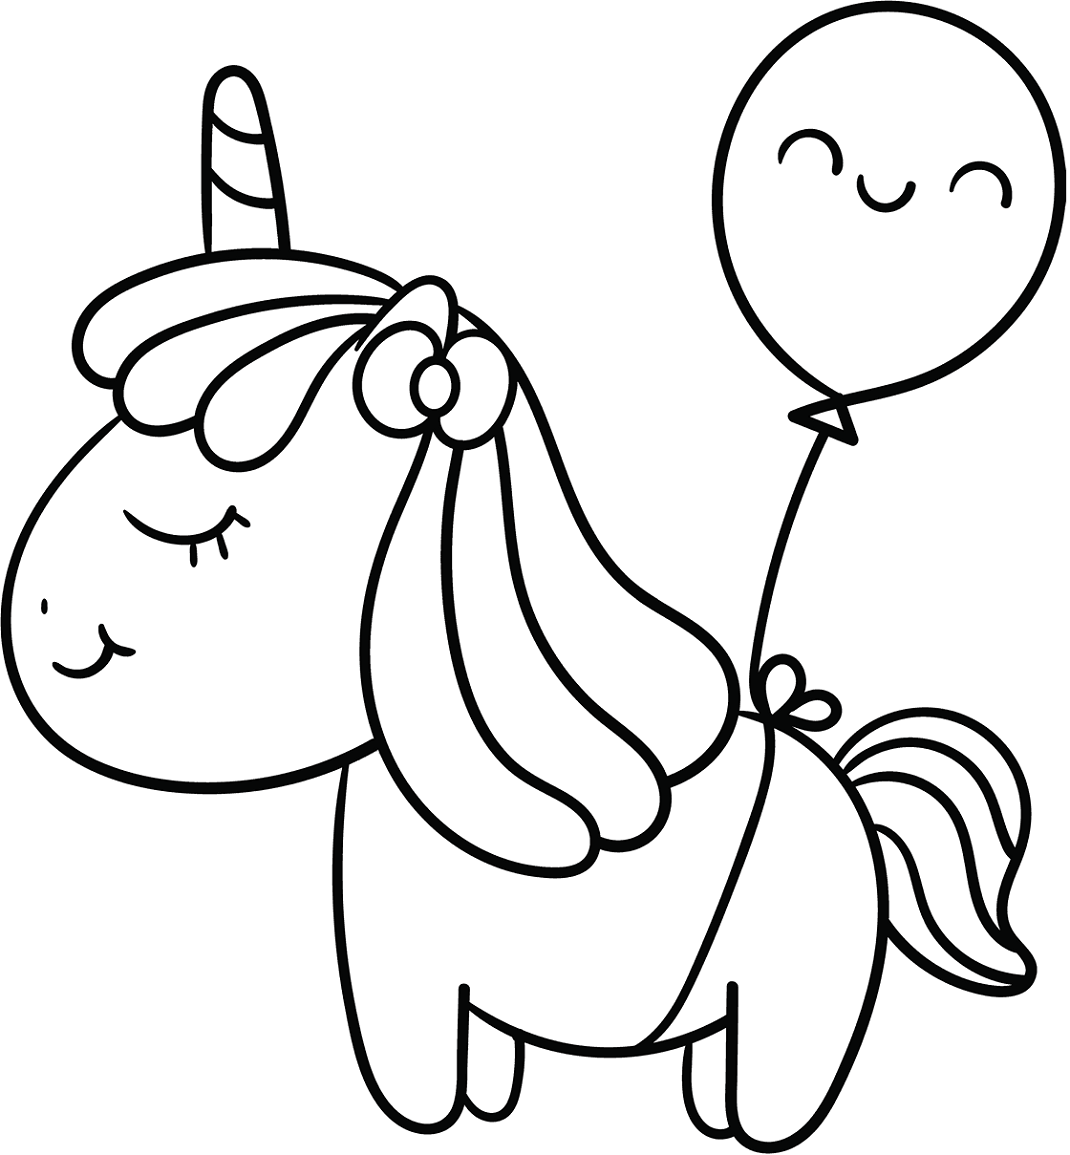 Baby Unicorn With A Balloon Coloring Page   Free Printable ...